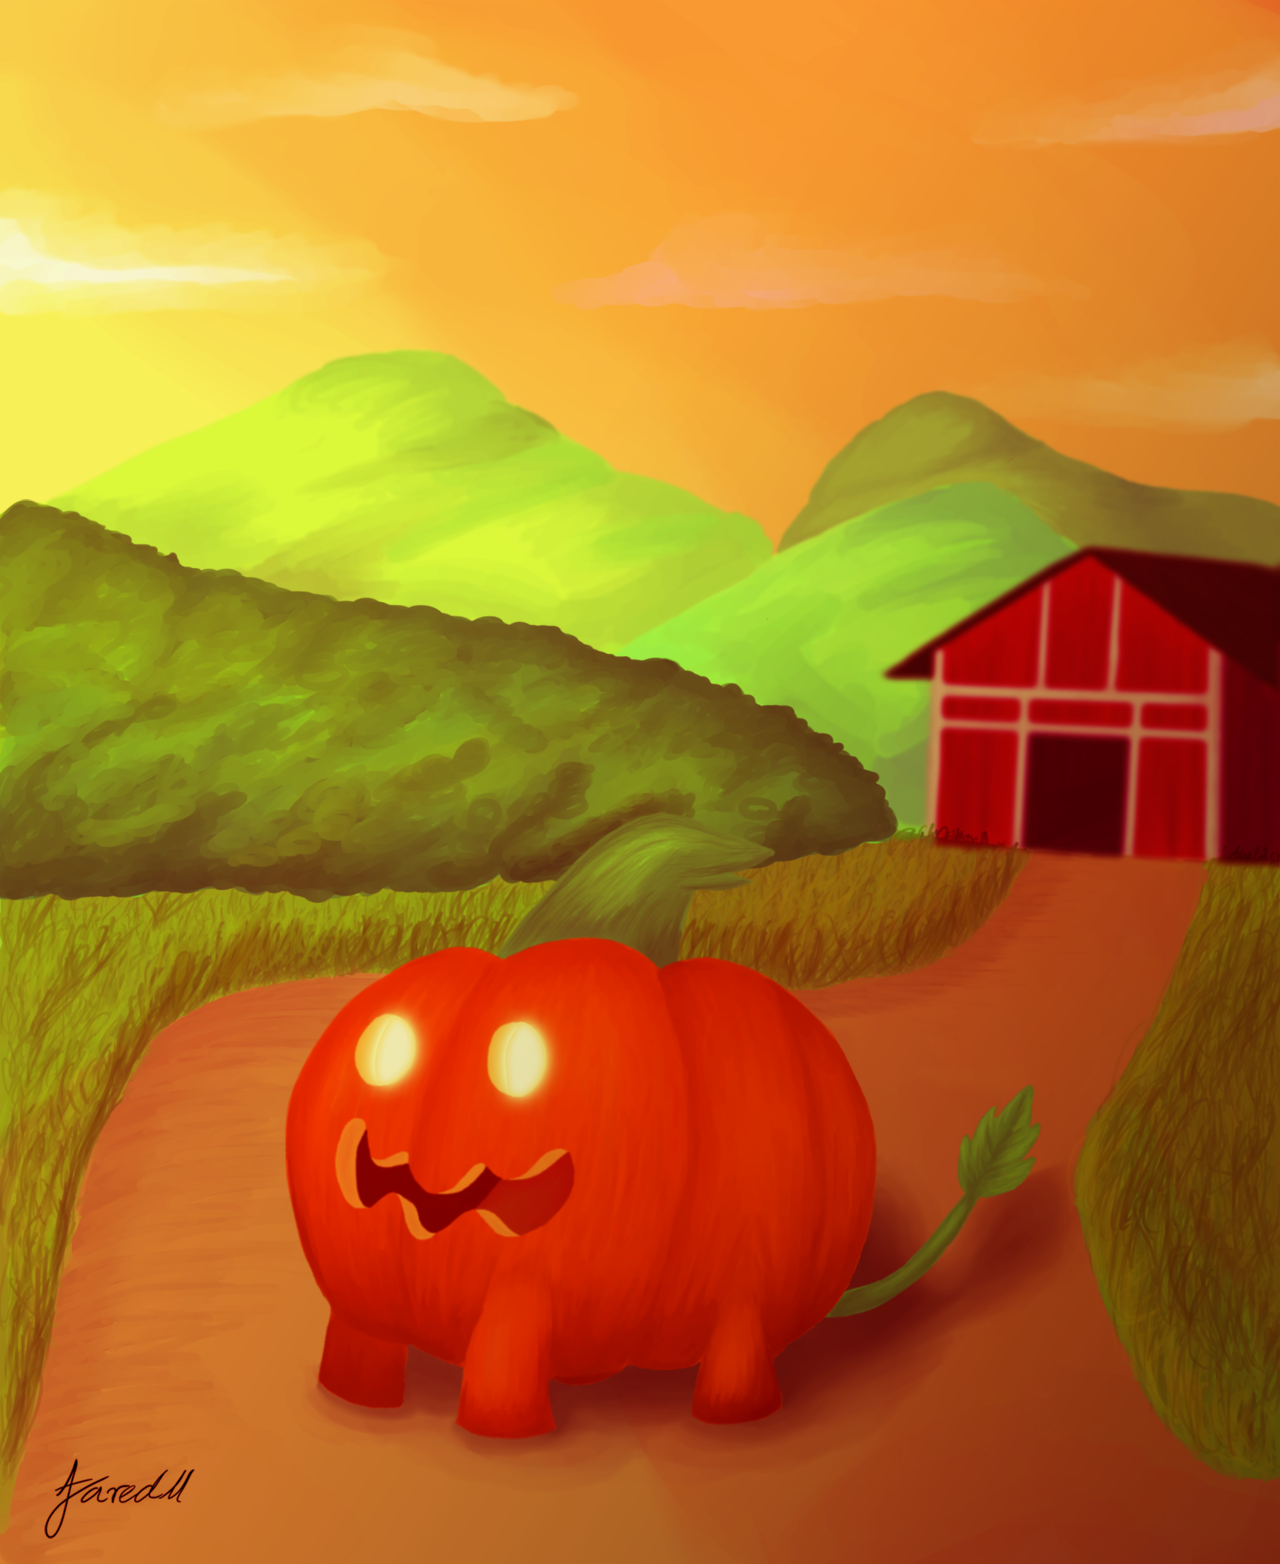 I noticed that painting of Pumpking I made a while ago was kinda blurry. So here is this one with better resolution